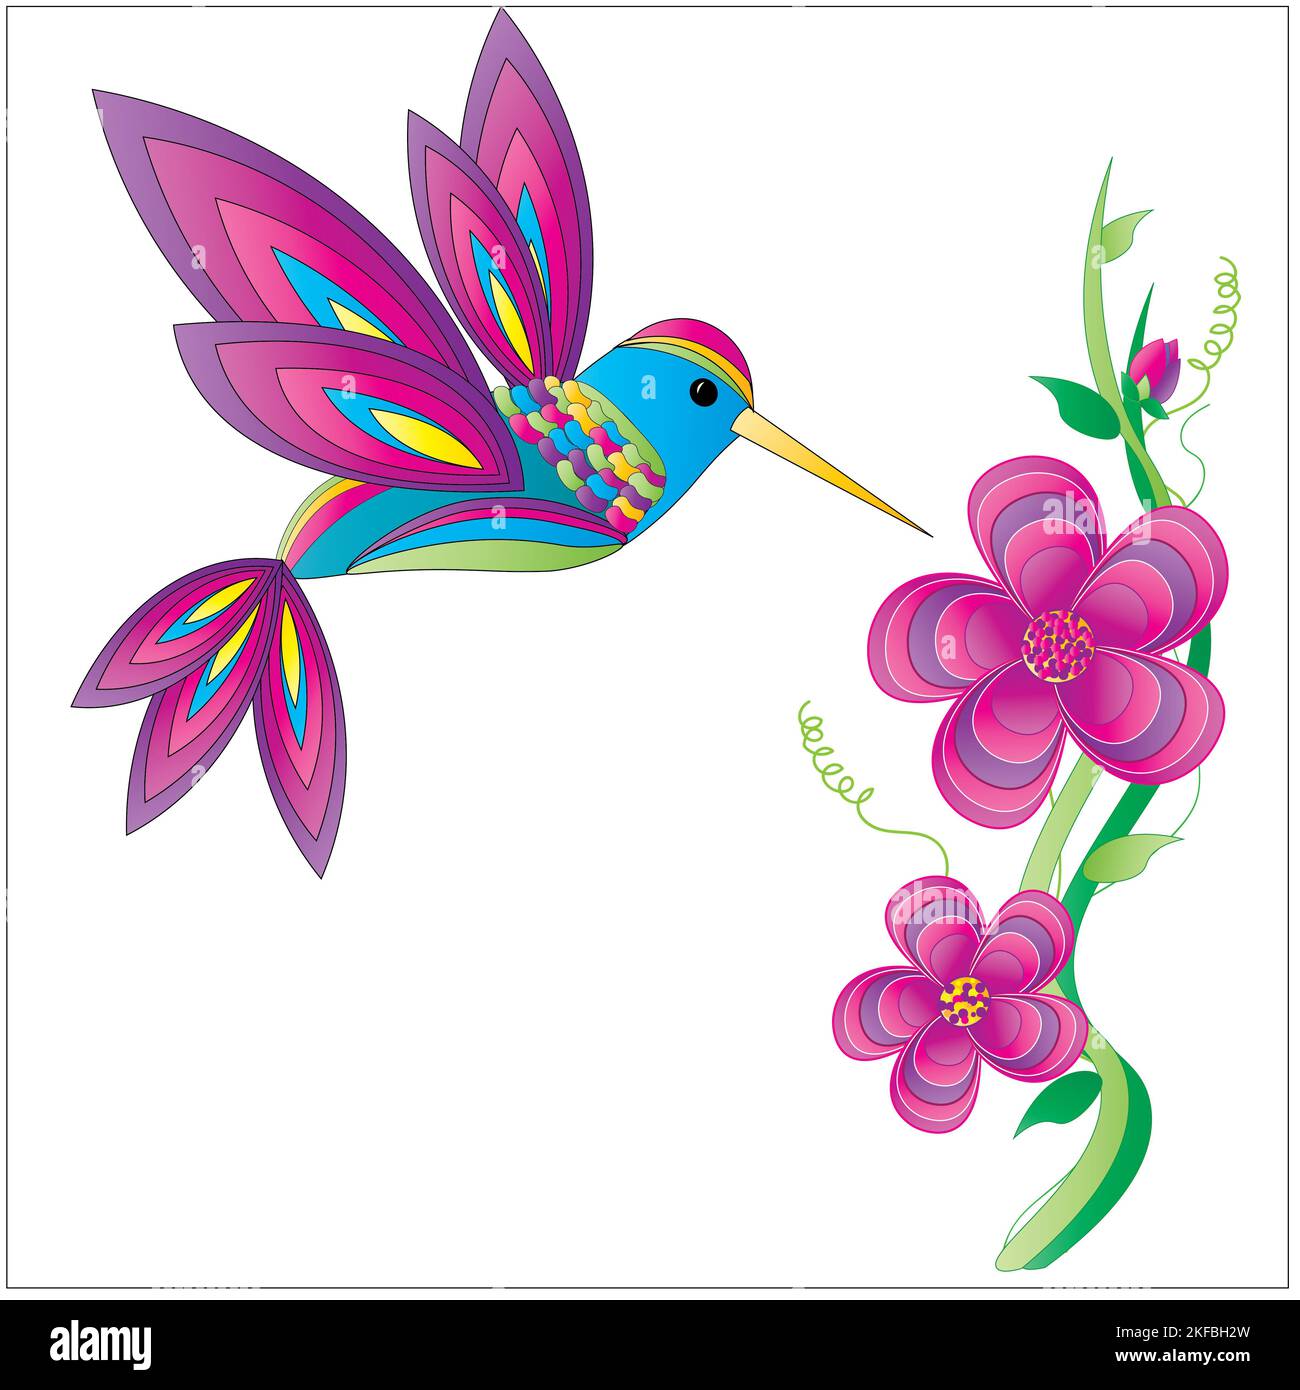 Abstract Illustration of a Hummingbird Getting Nectar out of flowers.  Bright bold colors. Stock Photo